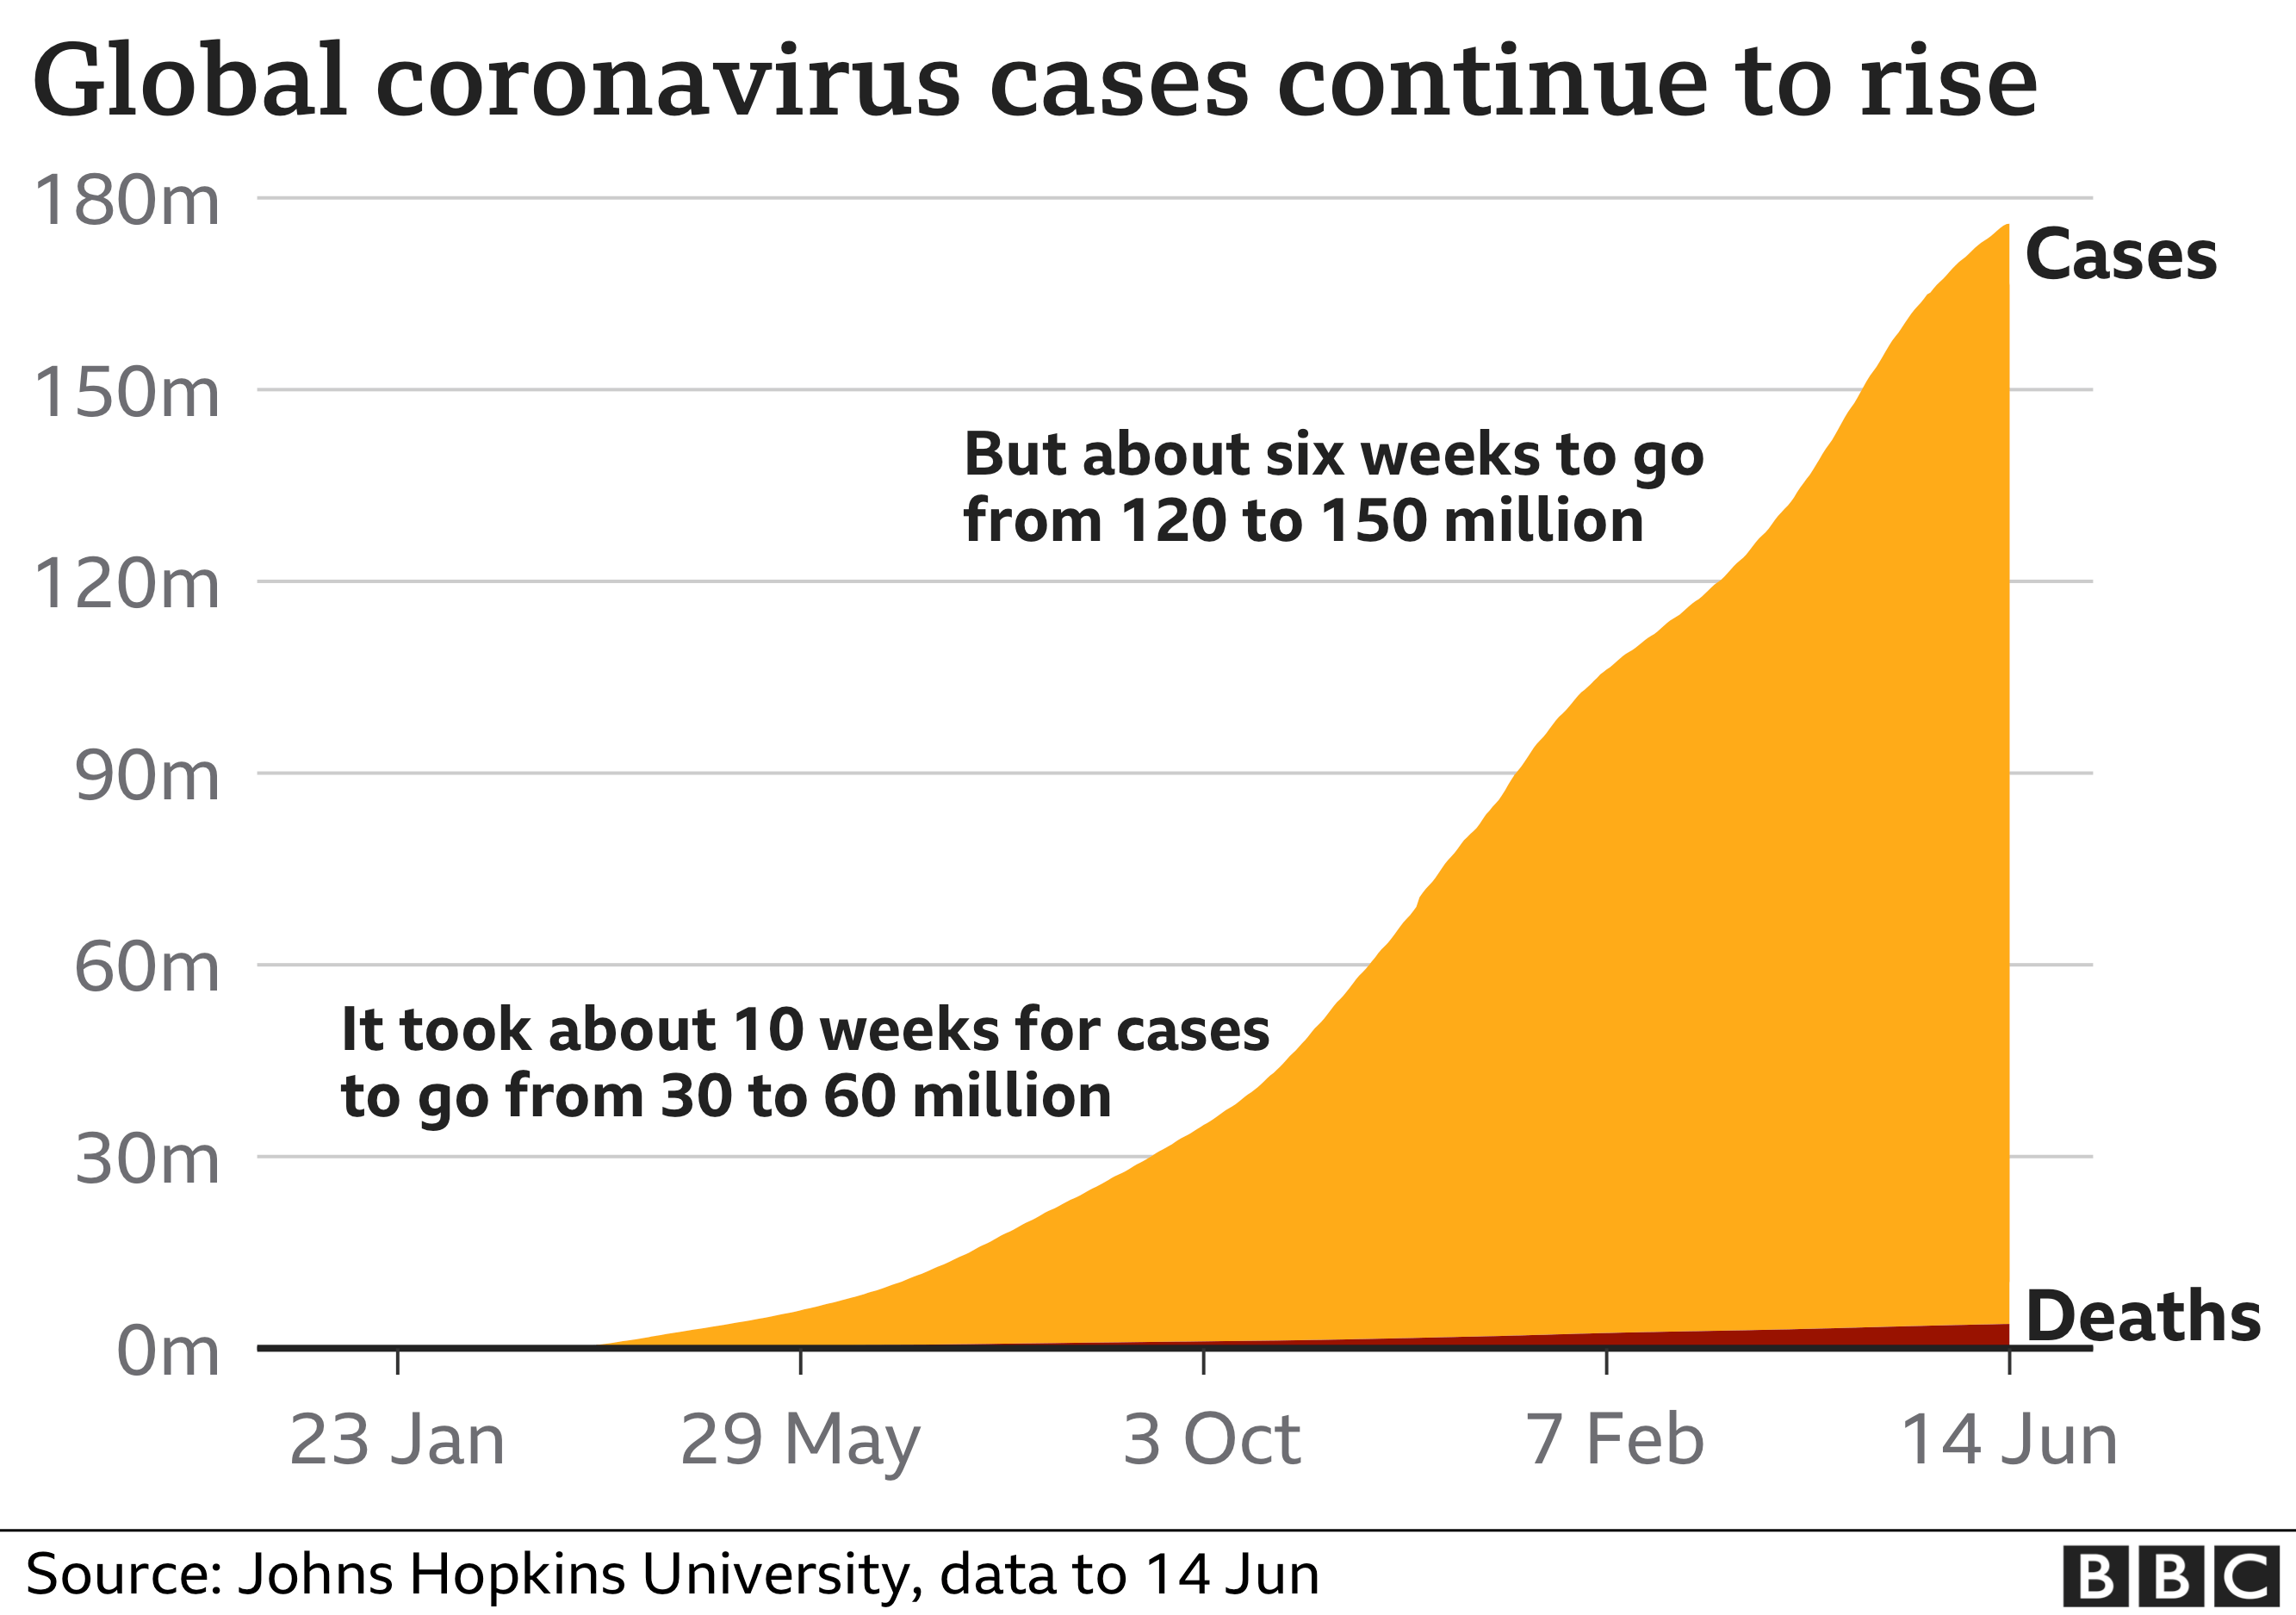 Chart showing there have been more than 175 million coronavirus cases reported worldwide. Updated 14 June.